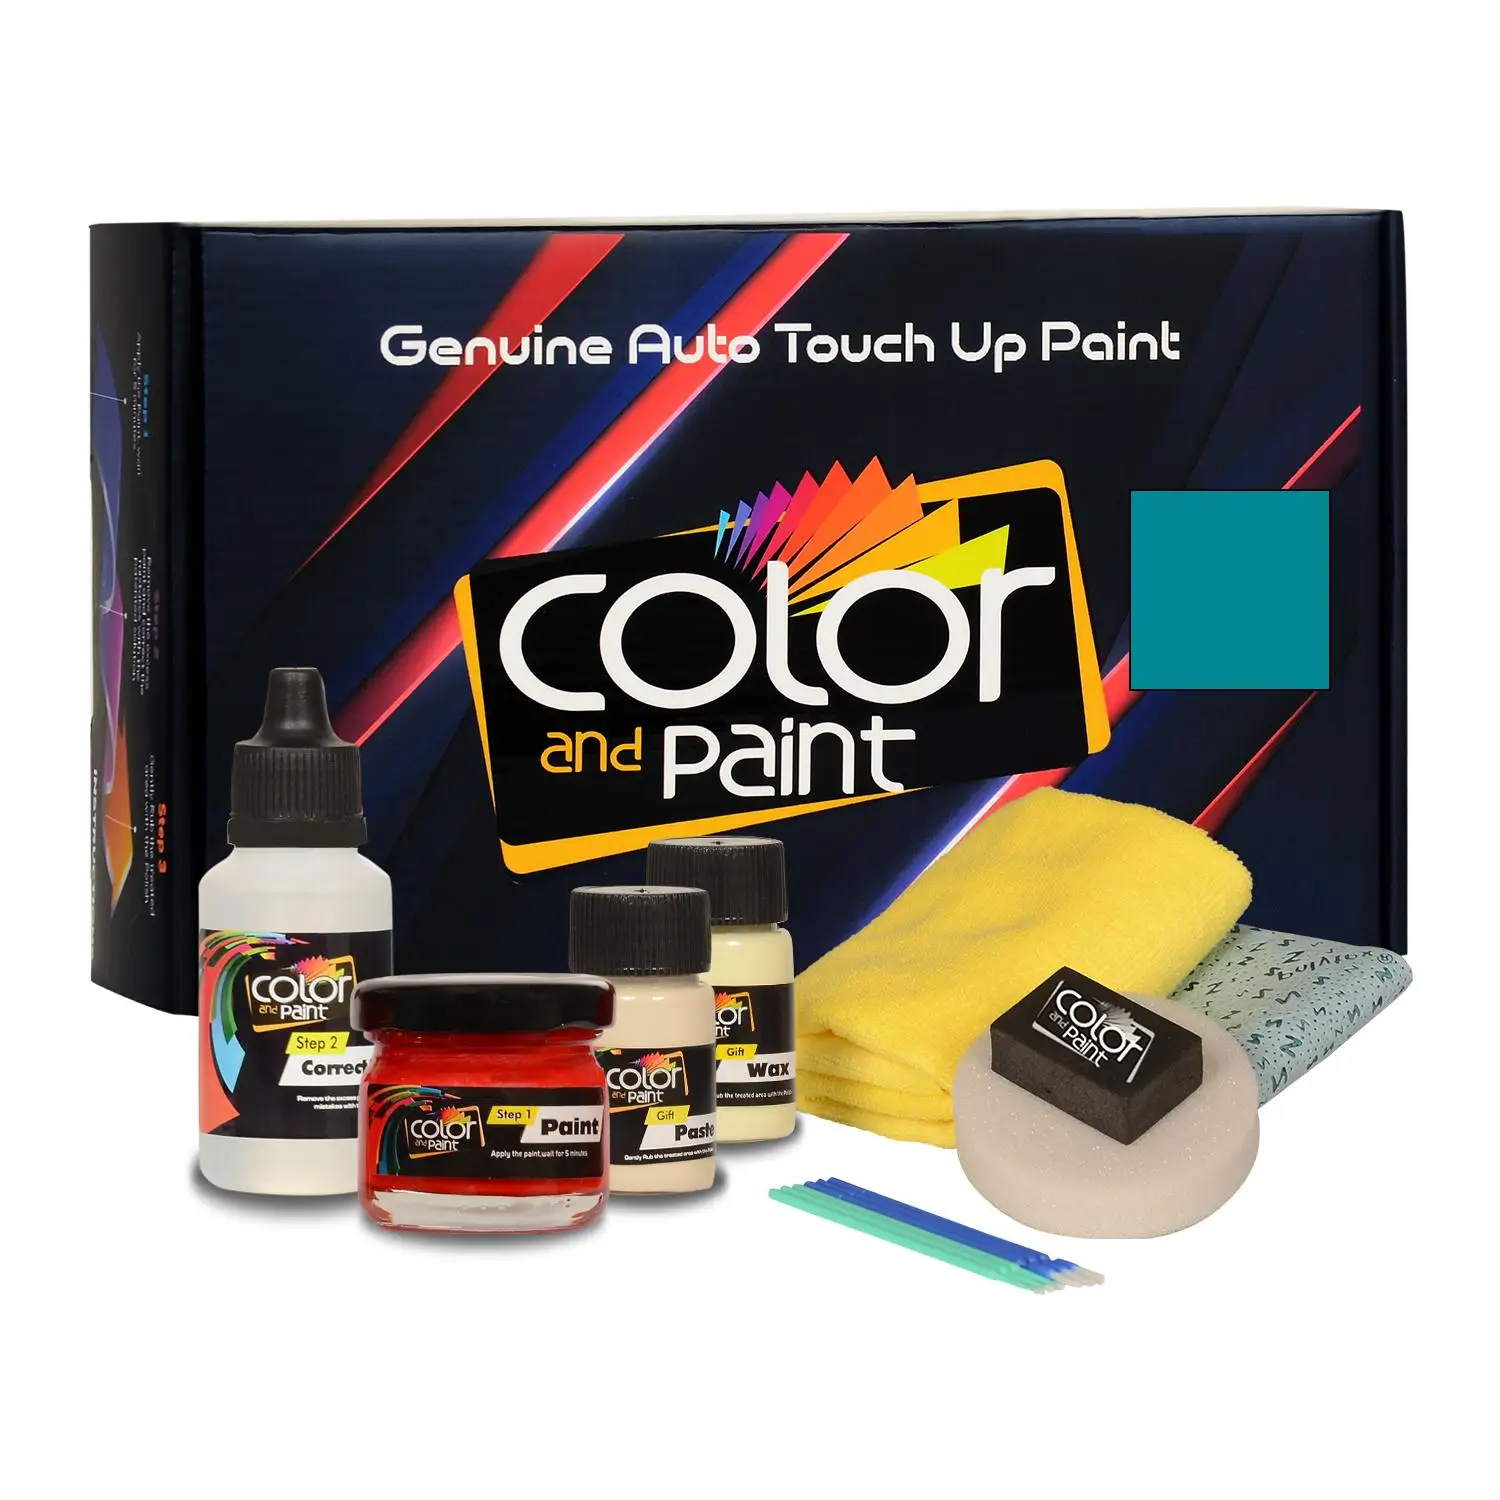 

Color and Paint compatible with Dodge Automotive Touch Up Paint - GLAMOUR TURQUOISE MET - PQ2 - Basic Care